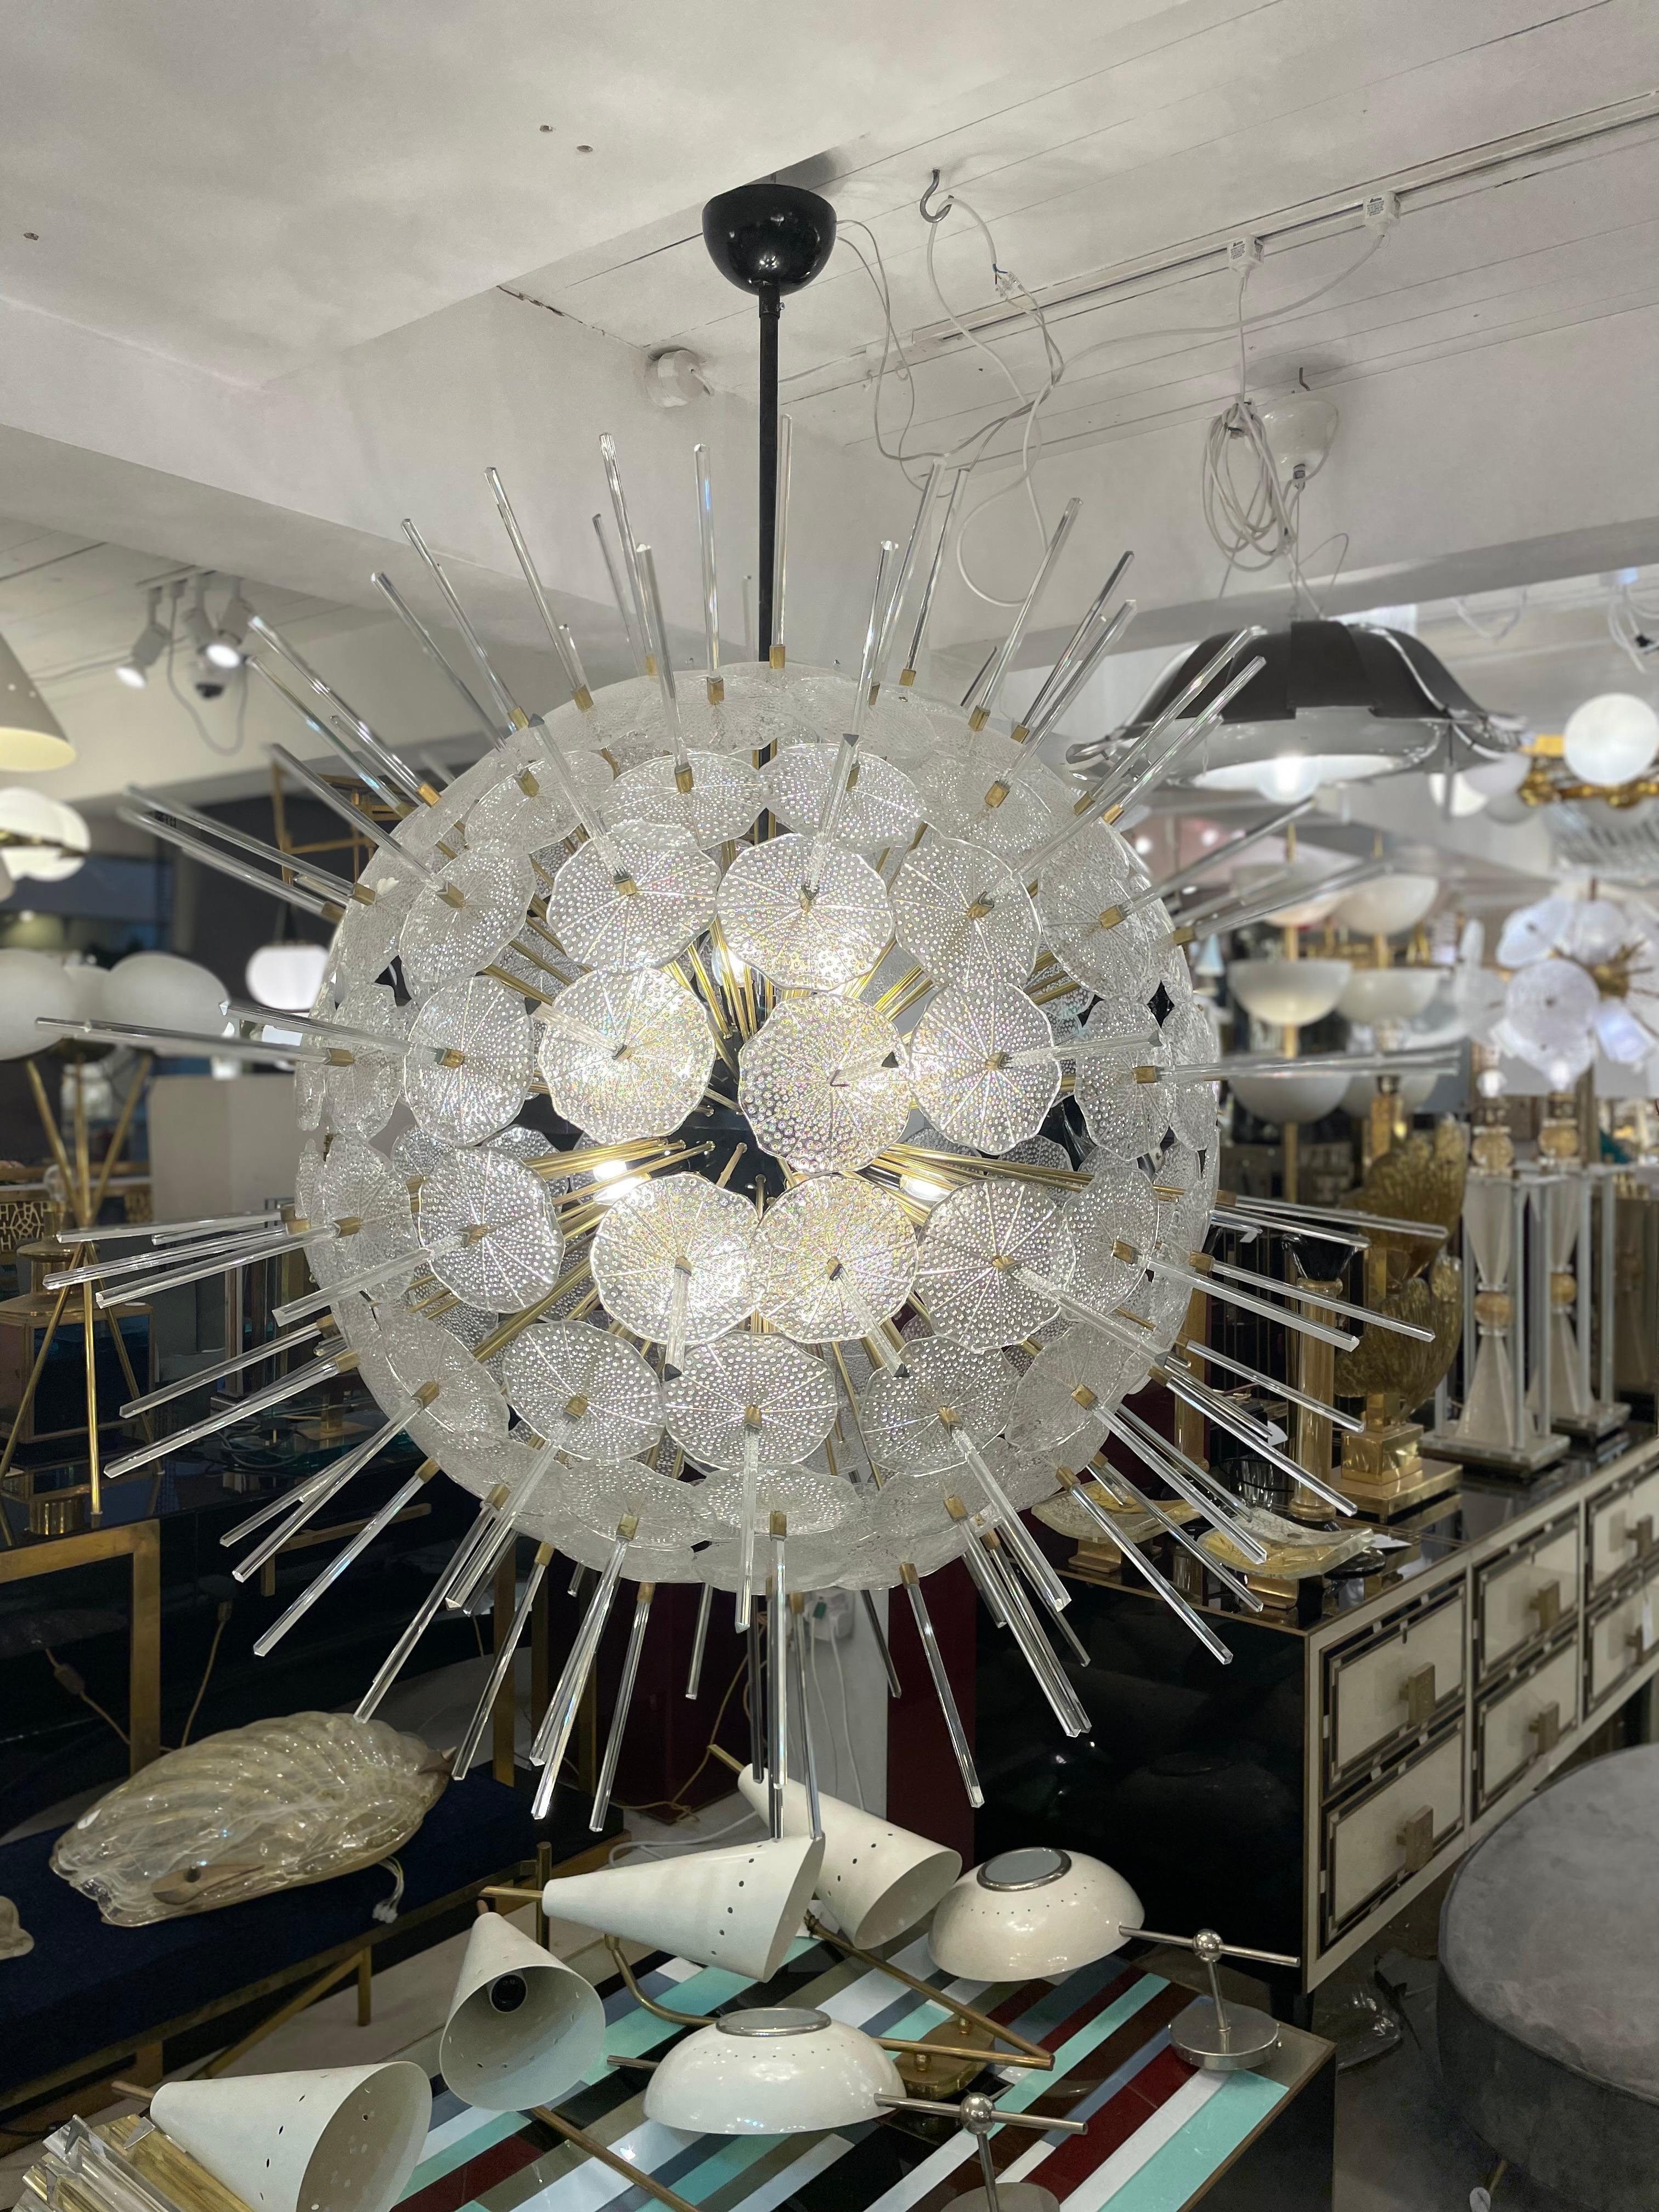 This Sputnik chandelier is made of a sphere and brass rods supports. The glass discs are hand blown Murano glass in white colour that remind “Jelly Fish” and all together create a wonderful warm glow, a truly spectacular piece of interior design. It